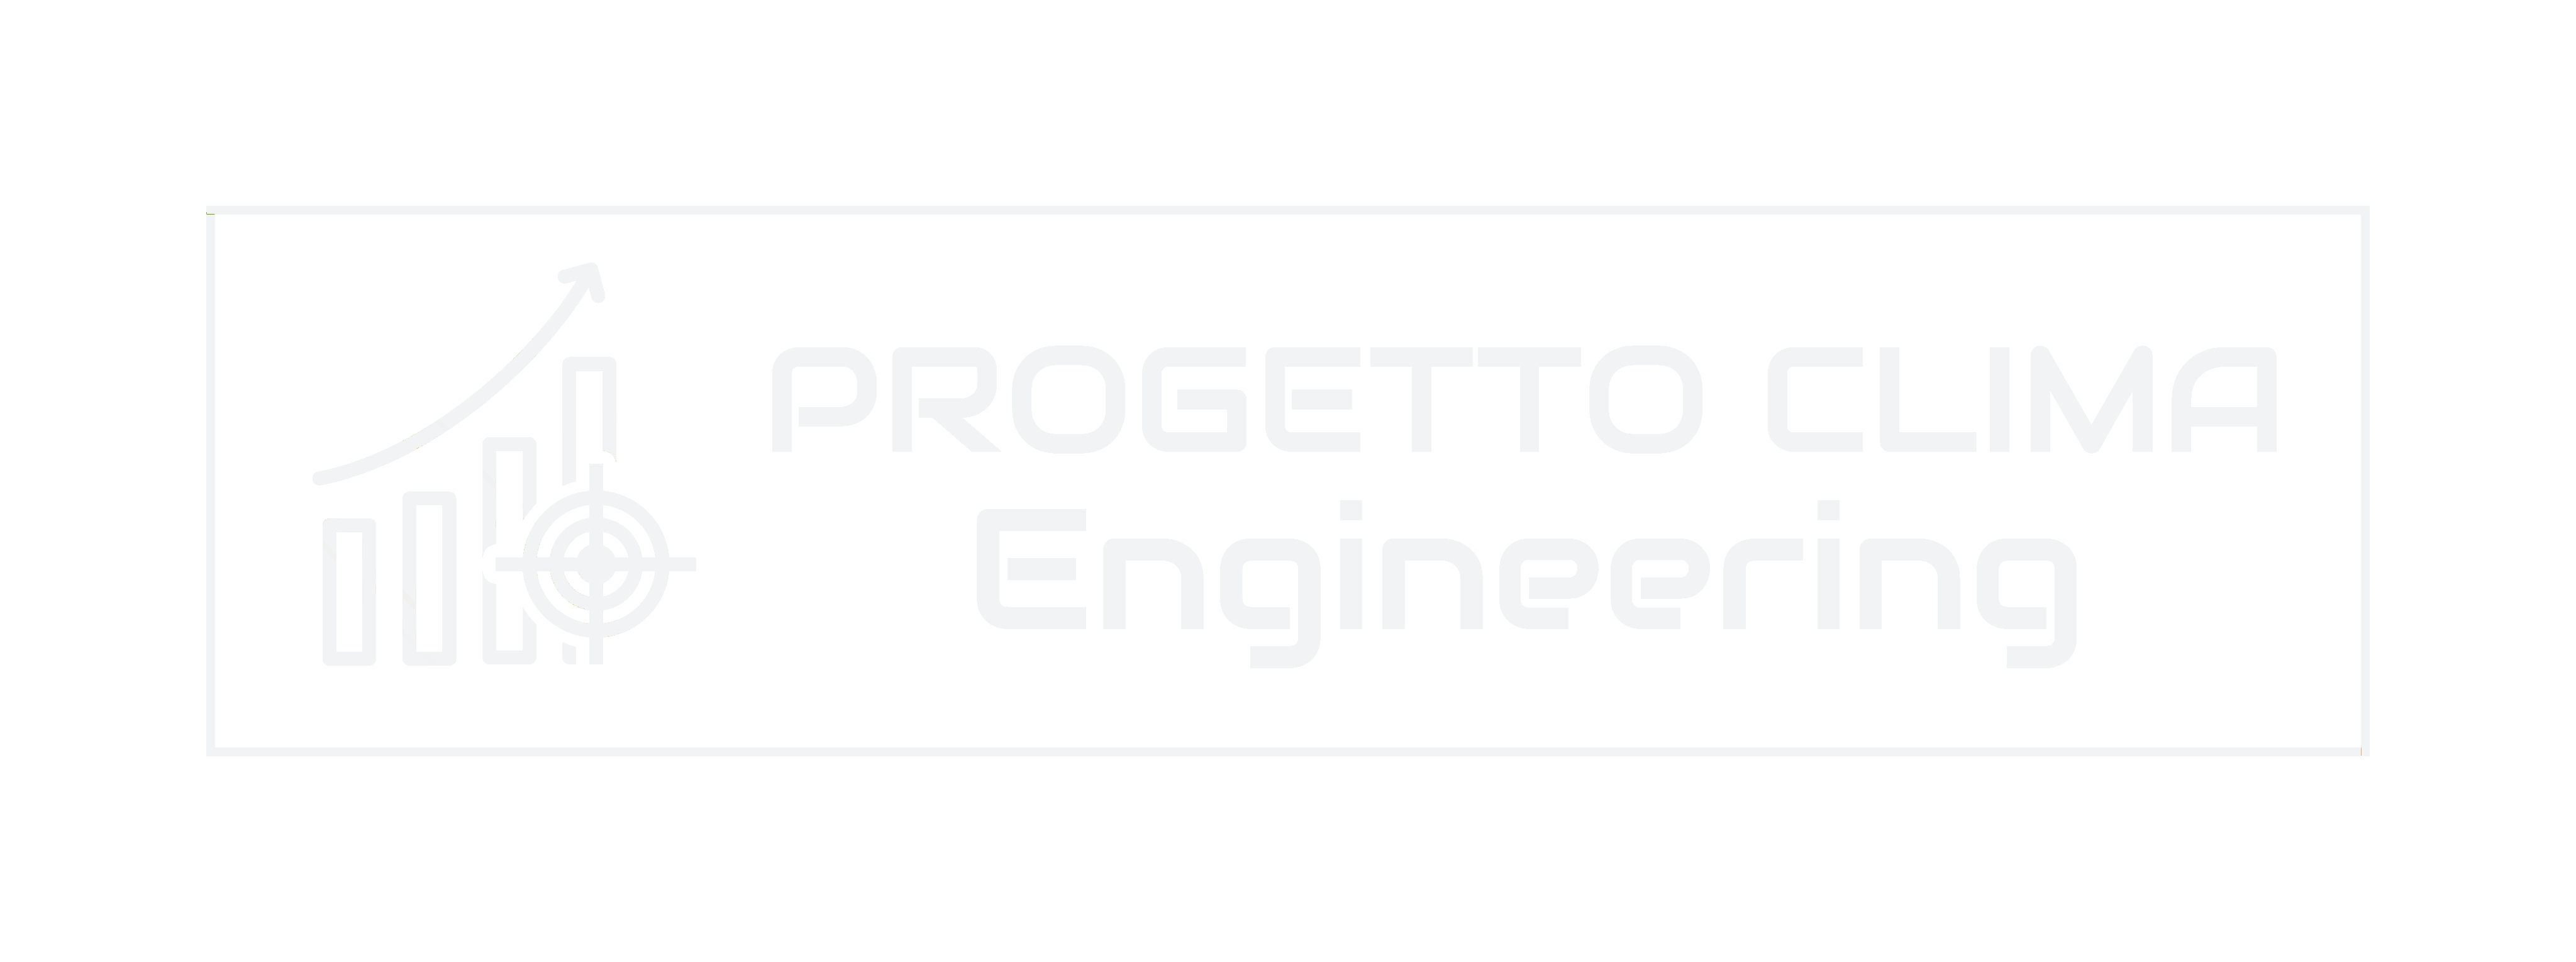 Progetto Clima Engineering